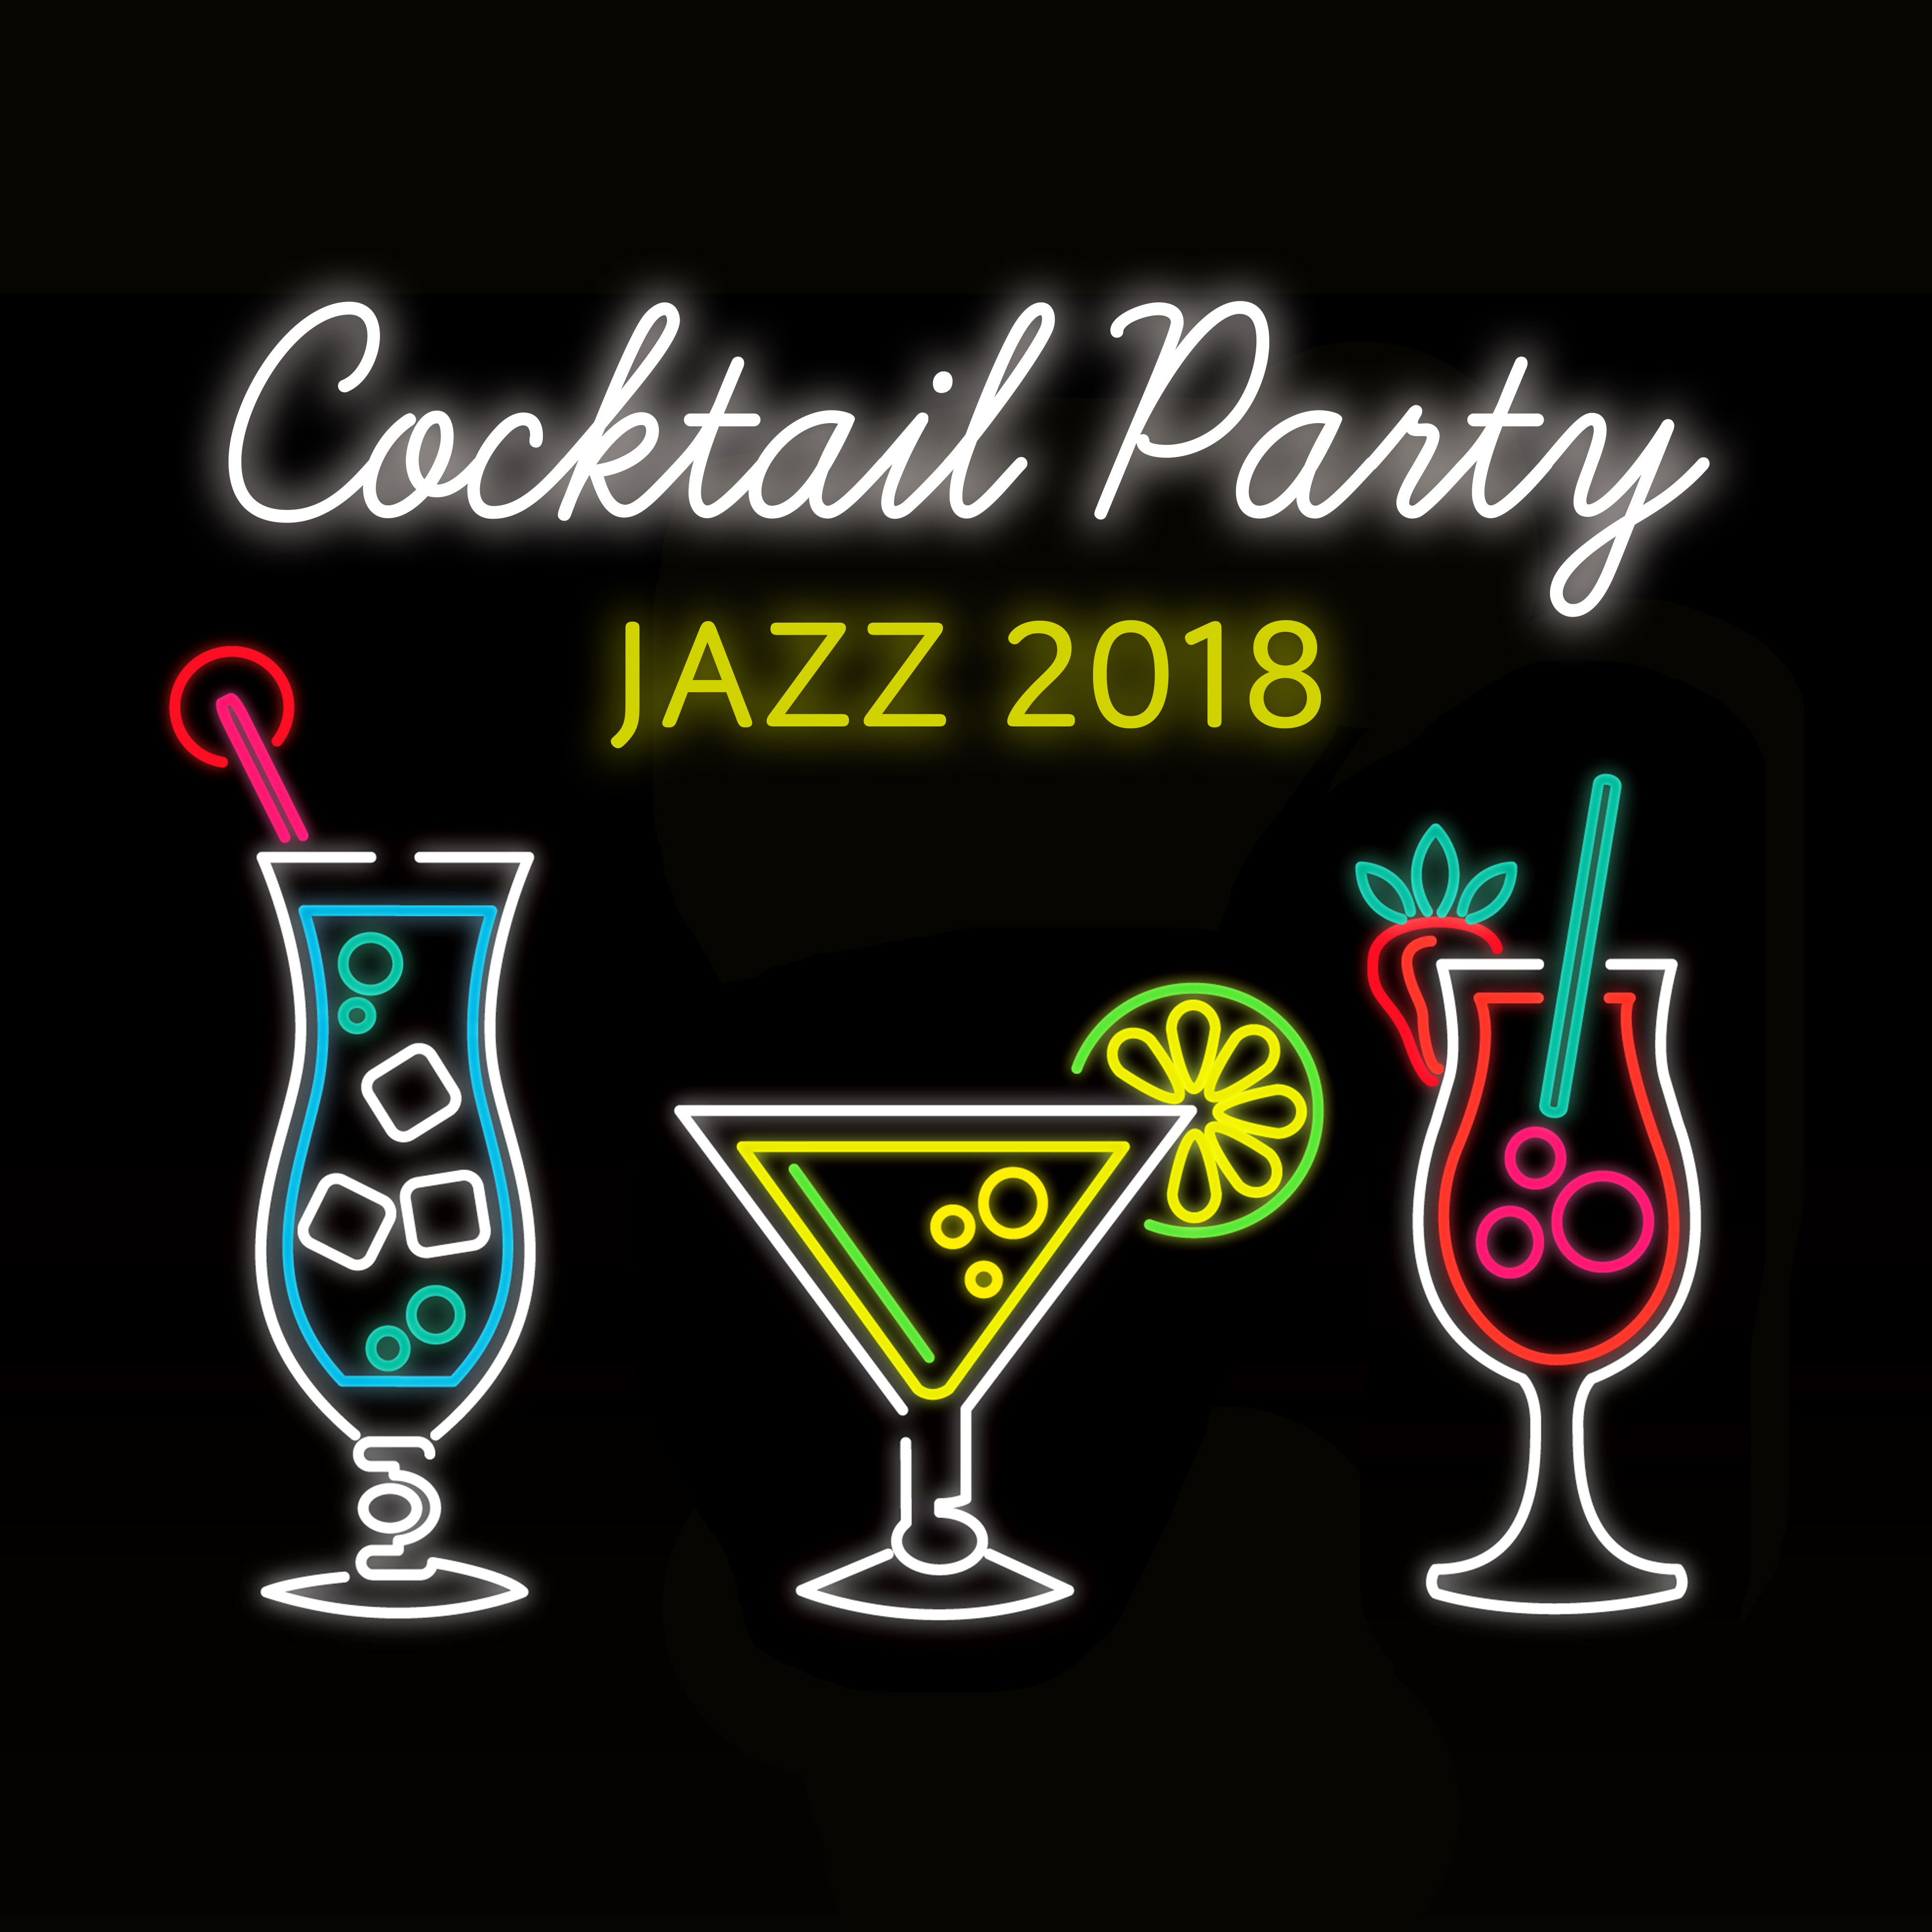 Cocktail Party Jazz 2018